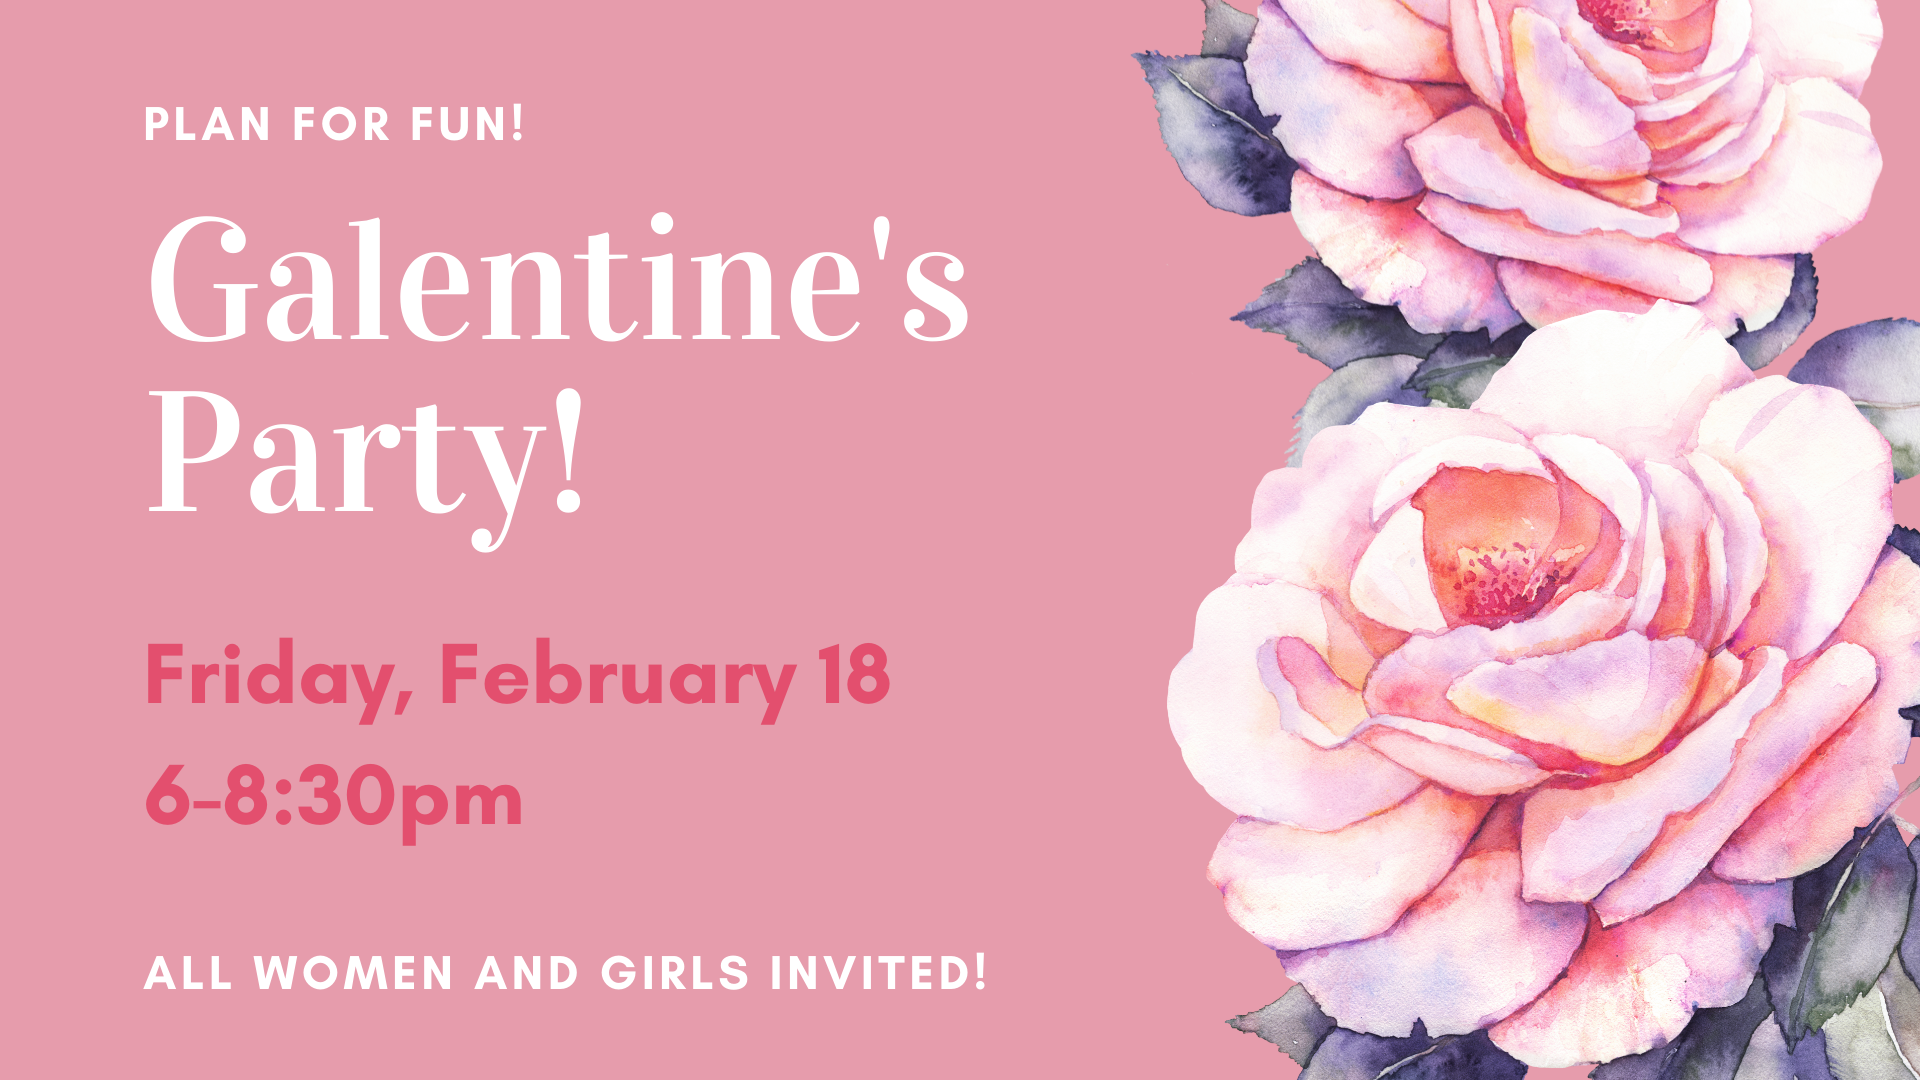 Galentine's party